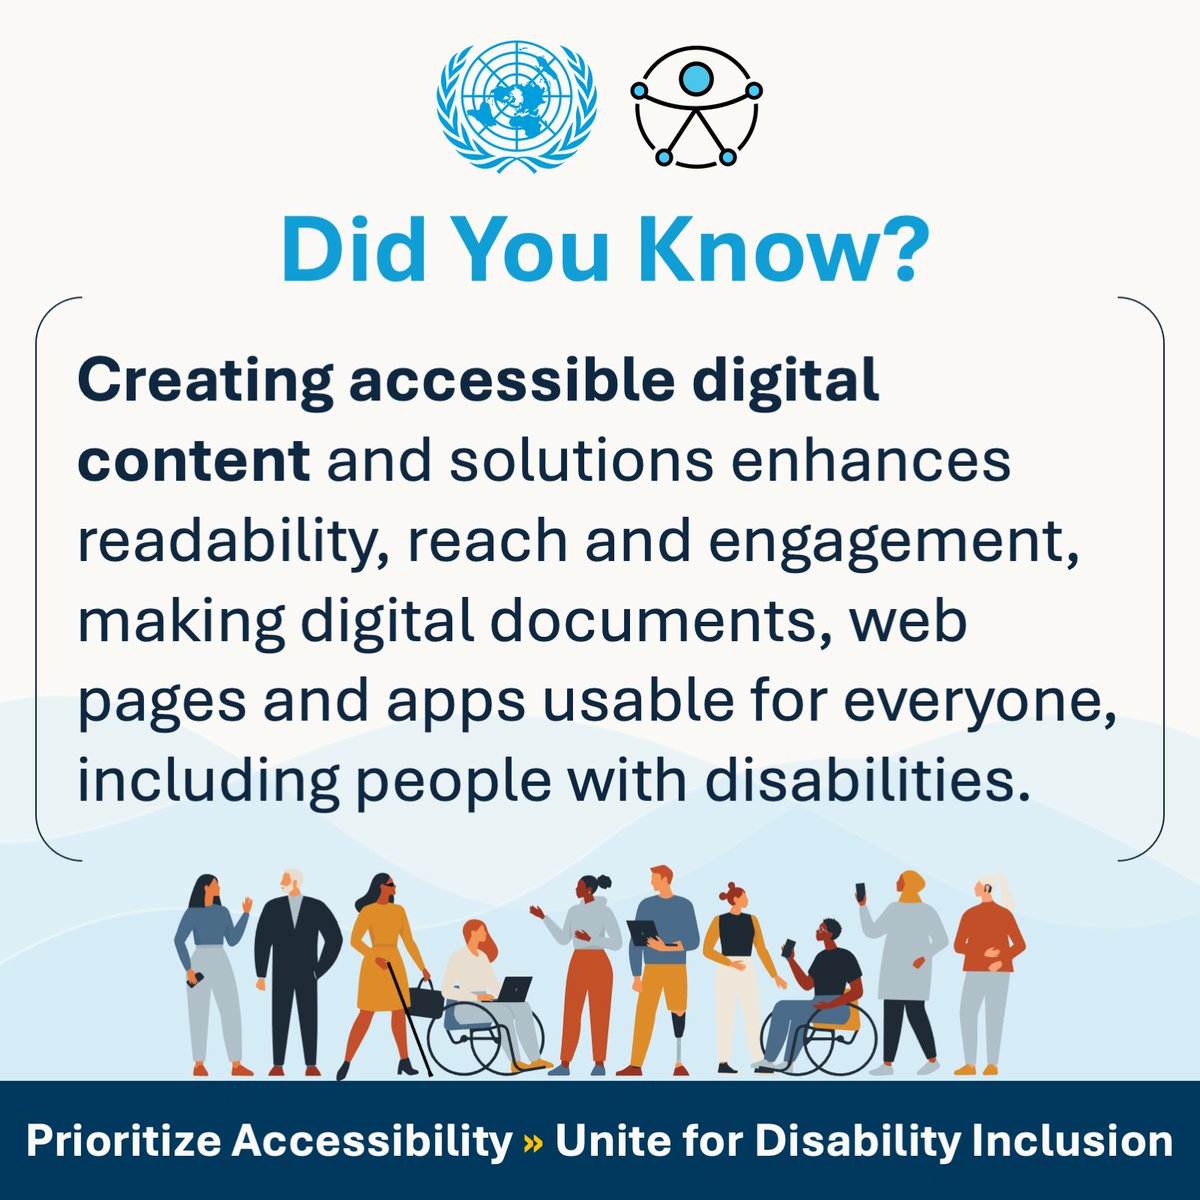 🎨 Accessible design isn't a compromise—it's an enhancement! @UN_OICT strives to make digital content more engaging and inclusive for everyone. #Accessibility #DigitalInclusion